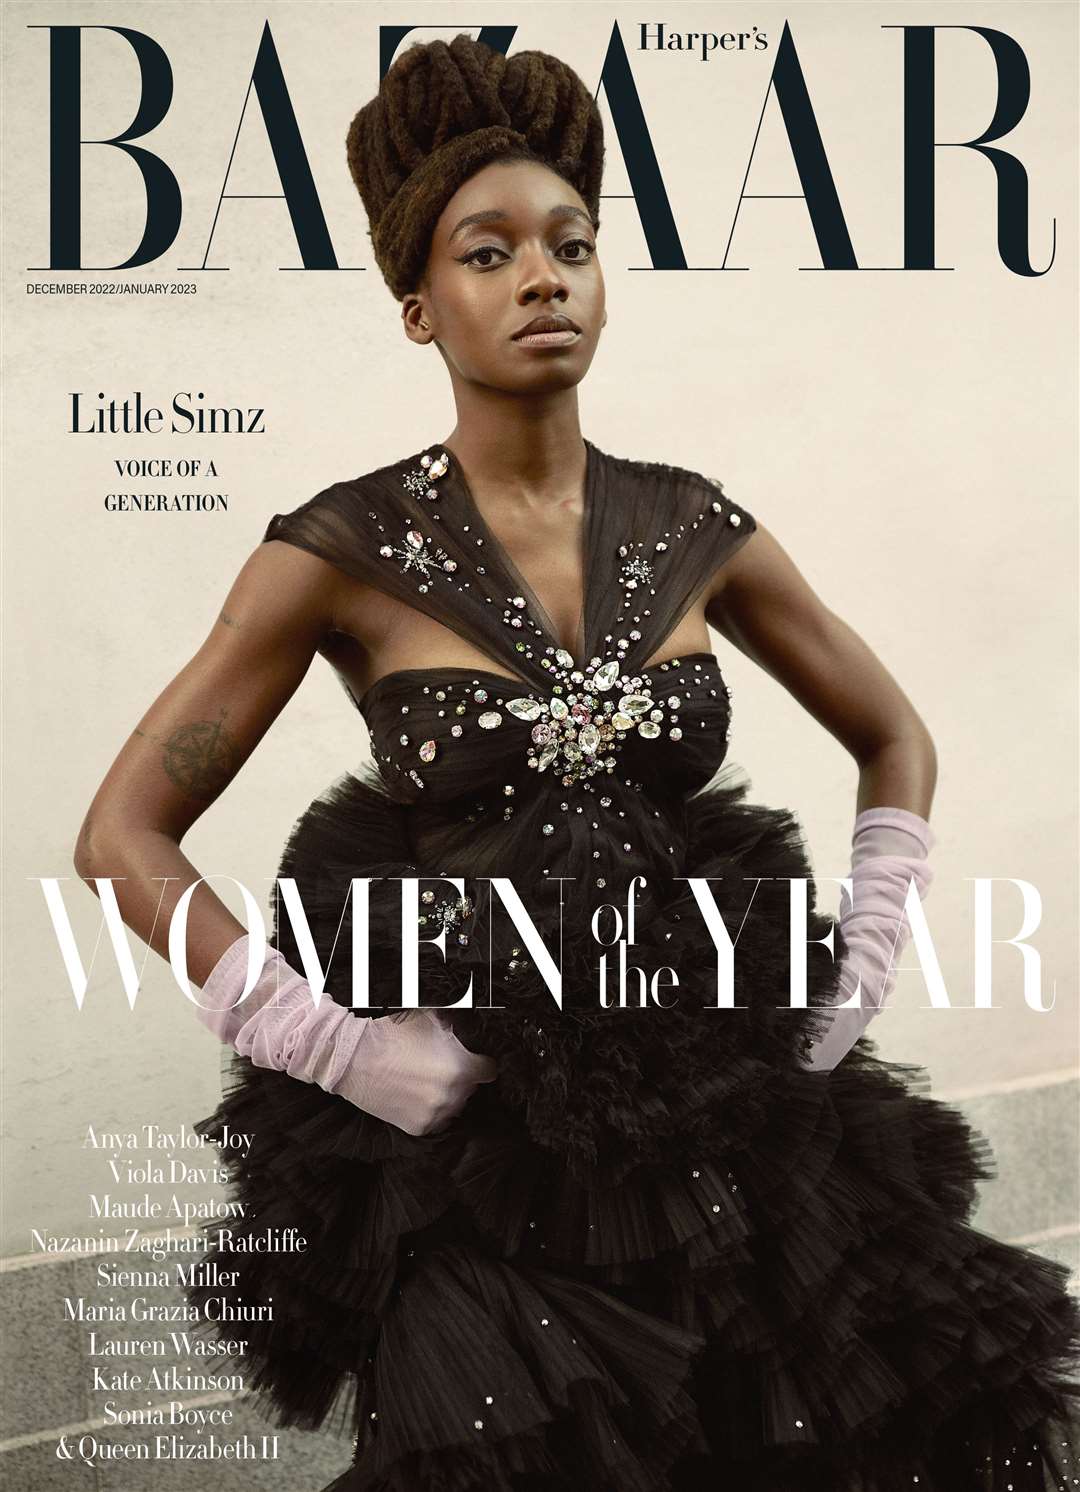 Little Simz received the Musician award and spoke to the magazine about being guided by a higher power (Harper’s Bazaar)